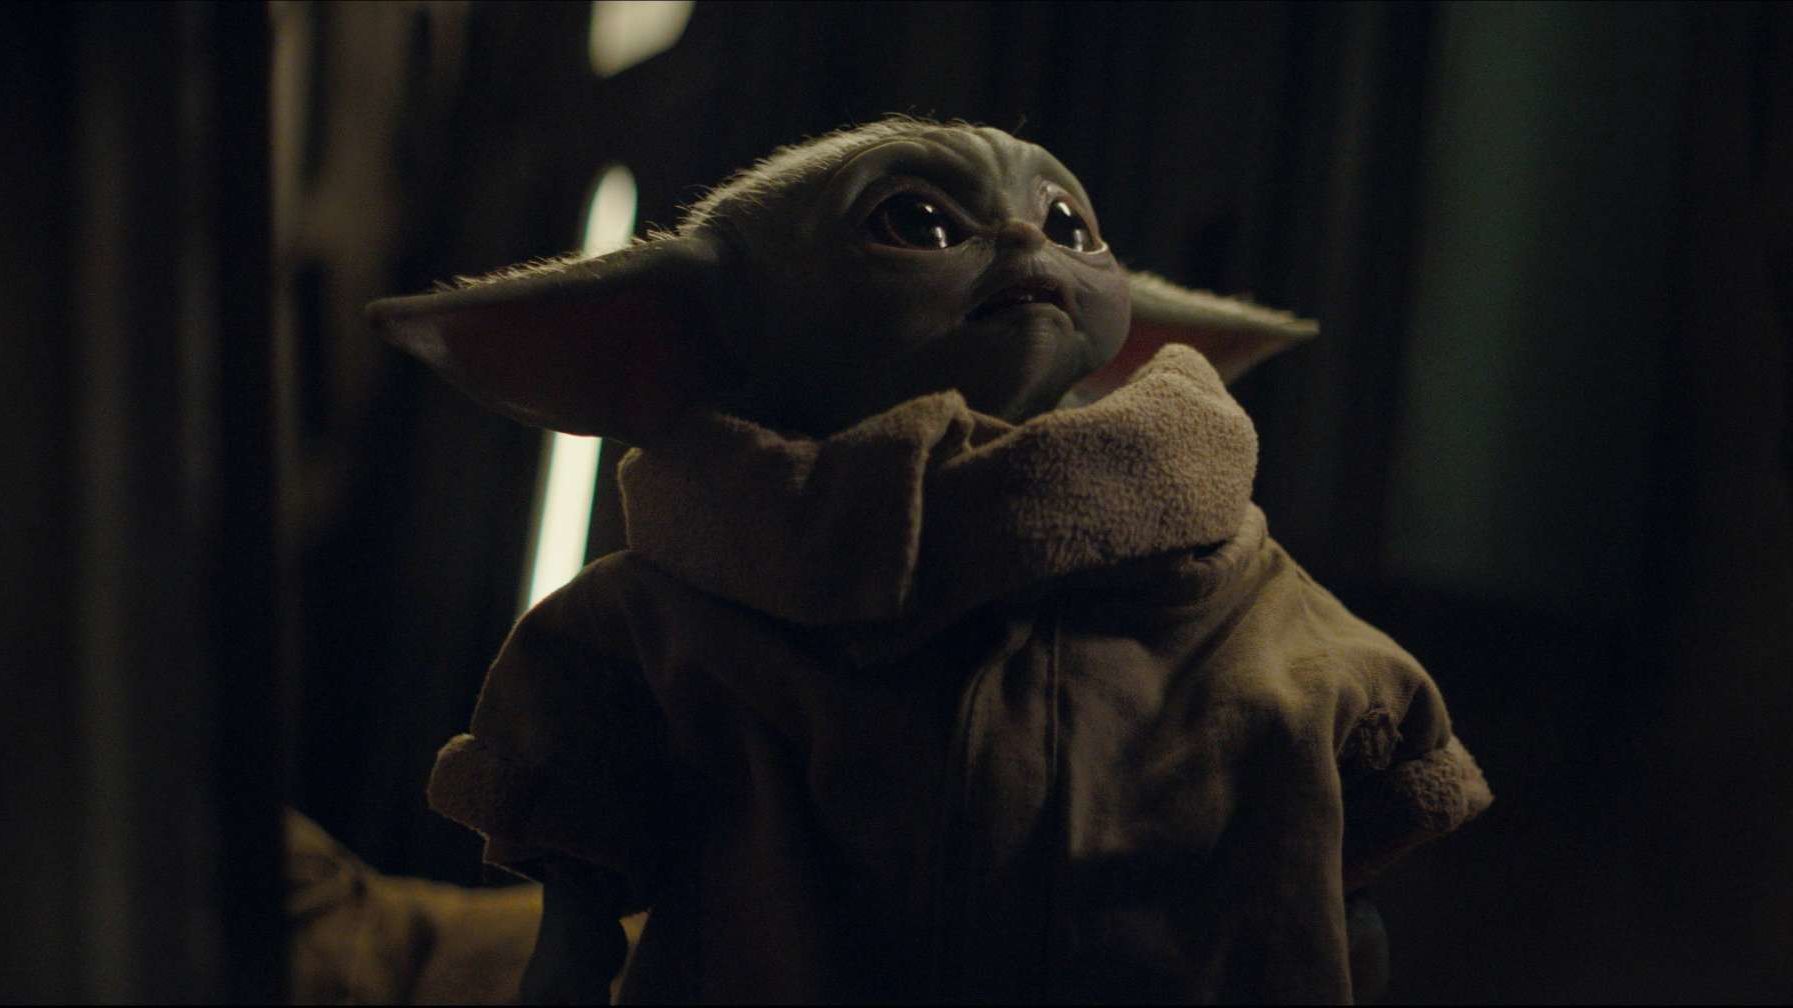 A Life-Sizedâ€”and Extremely Lifelikeâ€”Baby Yoda Statue Can Be Yours for $350